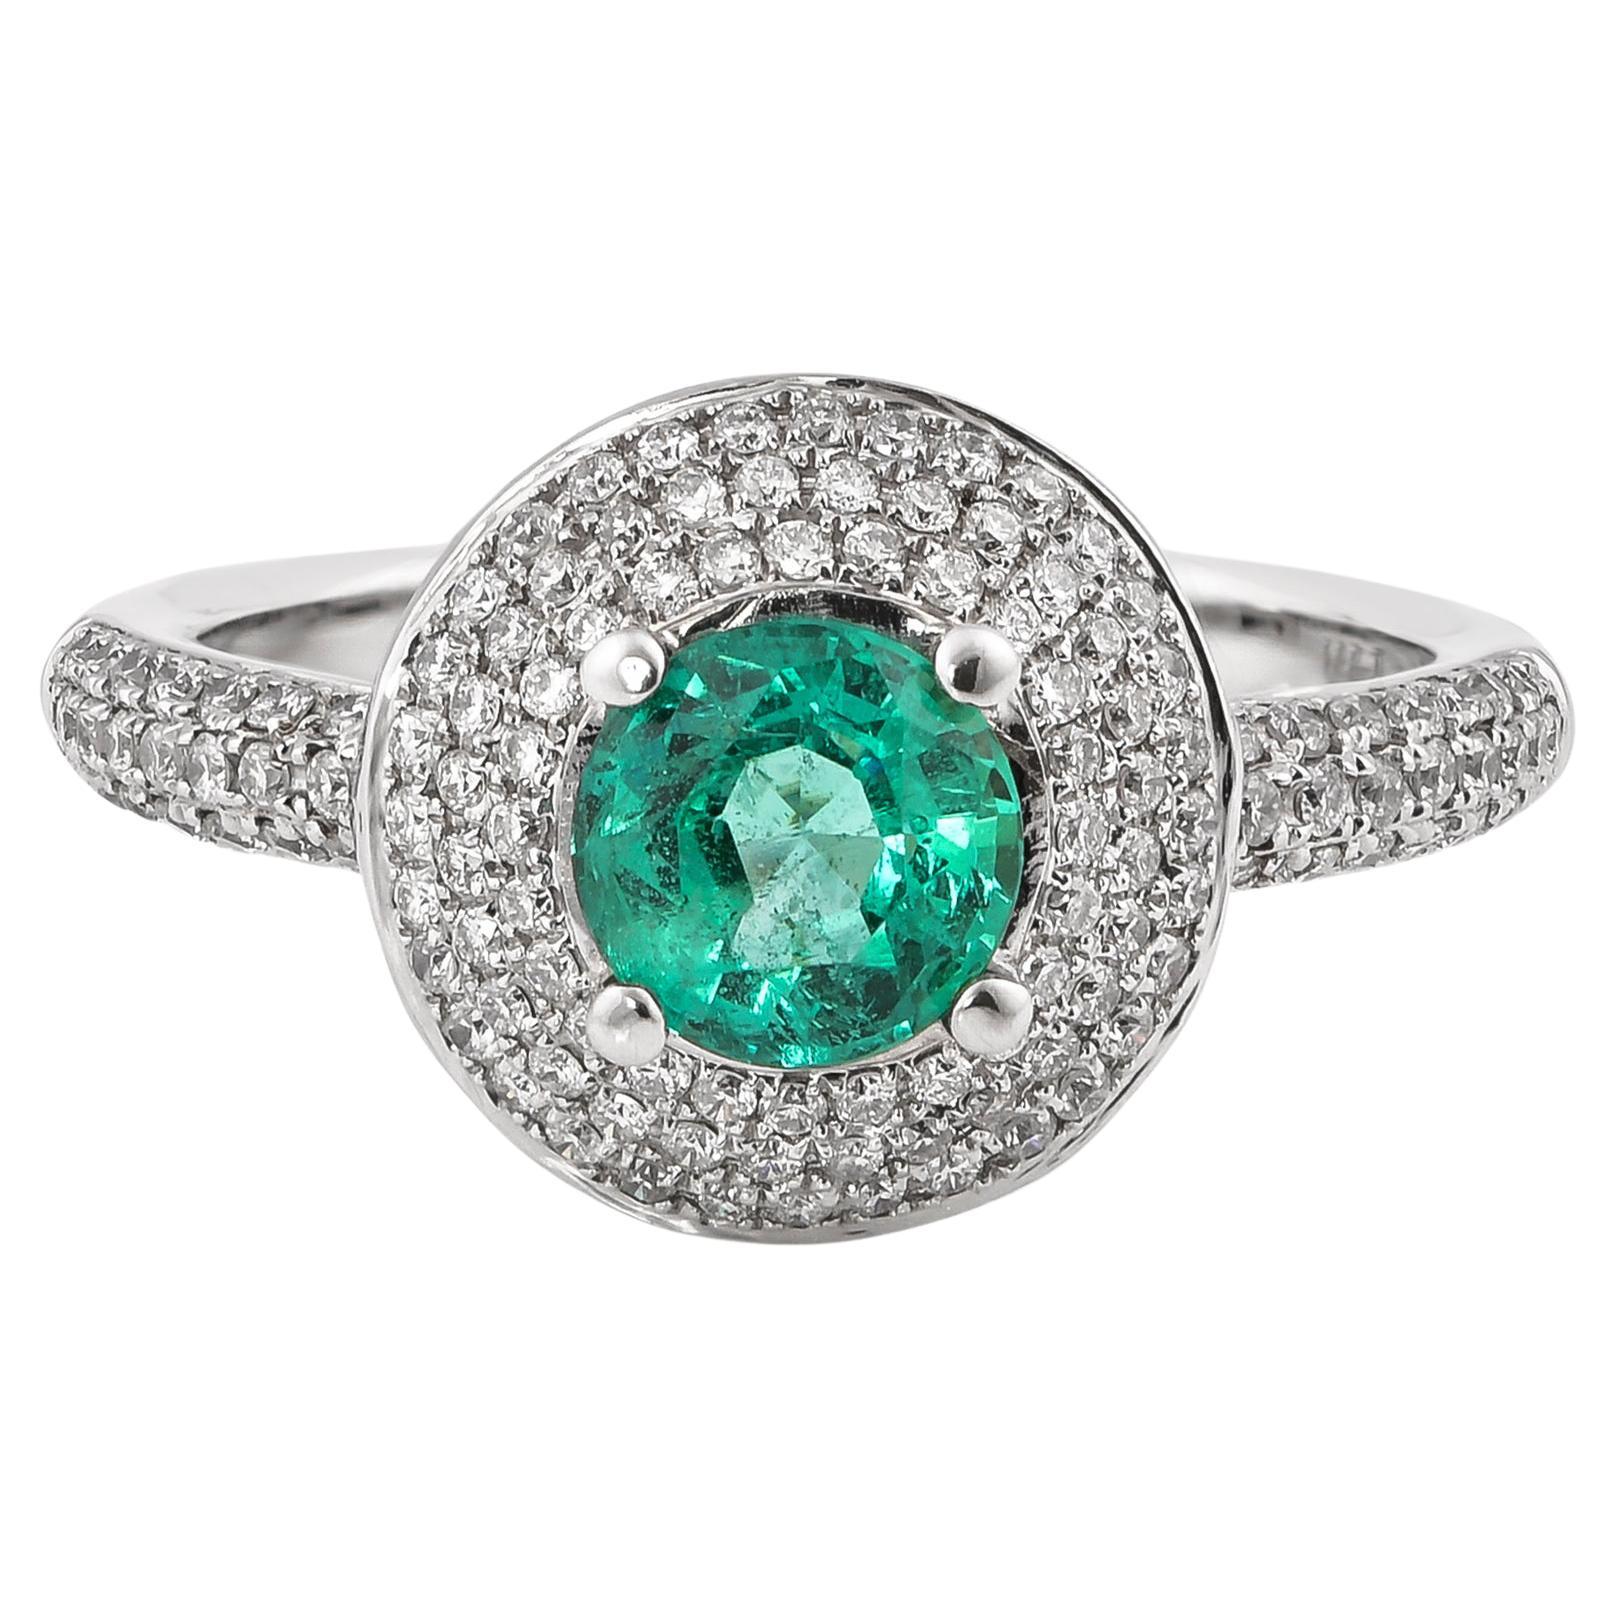 0.6 Carat Emerald and White Diamond Ring in 14 Karat White Gold For Sale